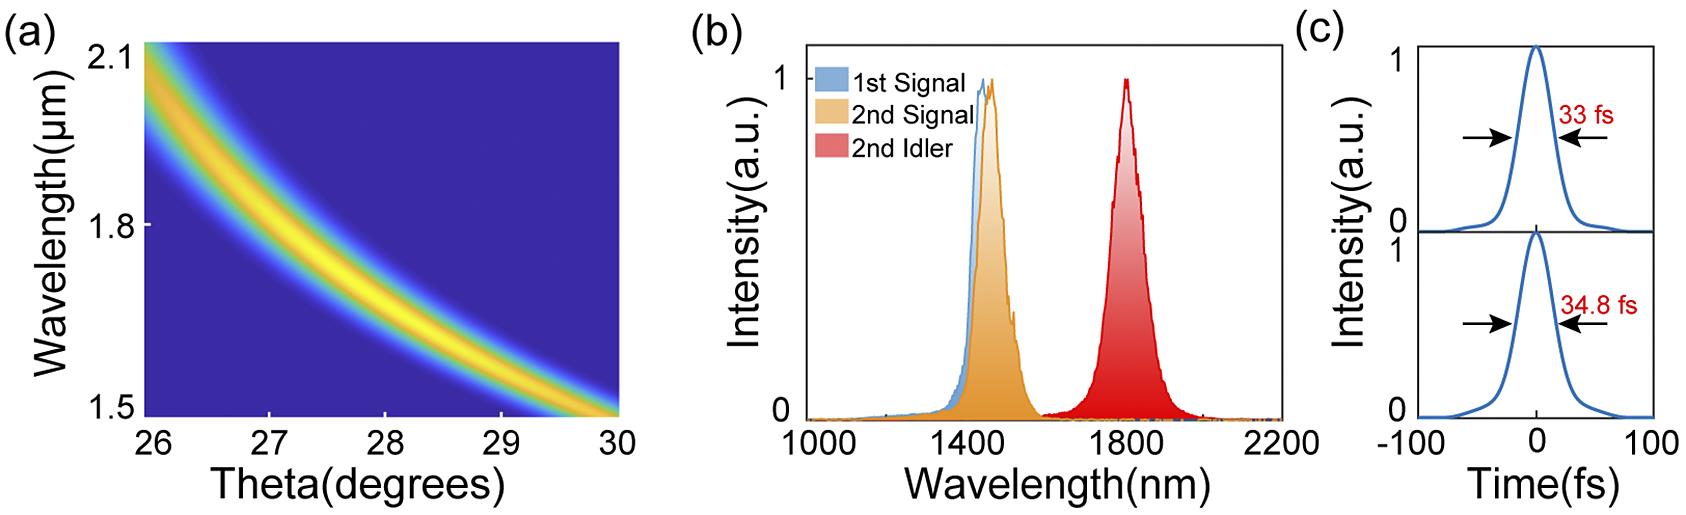 (a) Simulated phase-matching spectrum of the OPA process. (b) Spectra of the signal and the idler. (c) Calculated FTL pulse shapes of the signal and the idler.